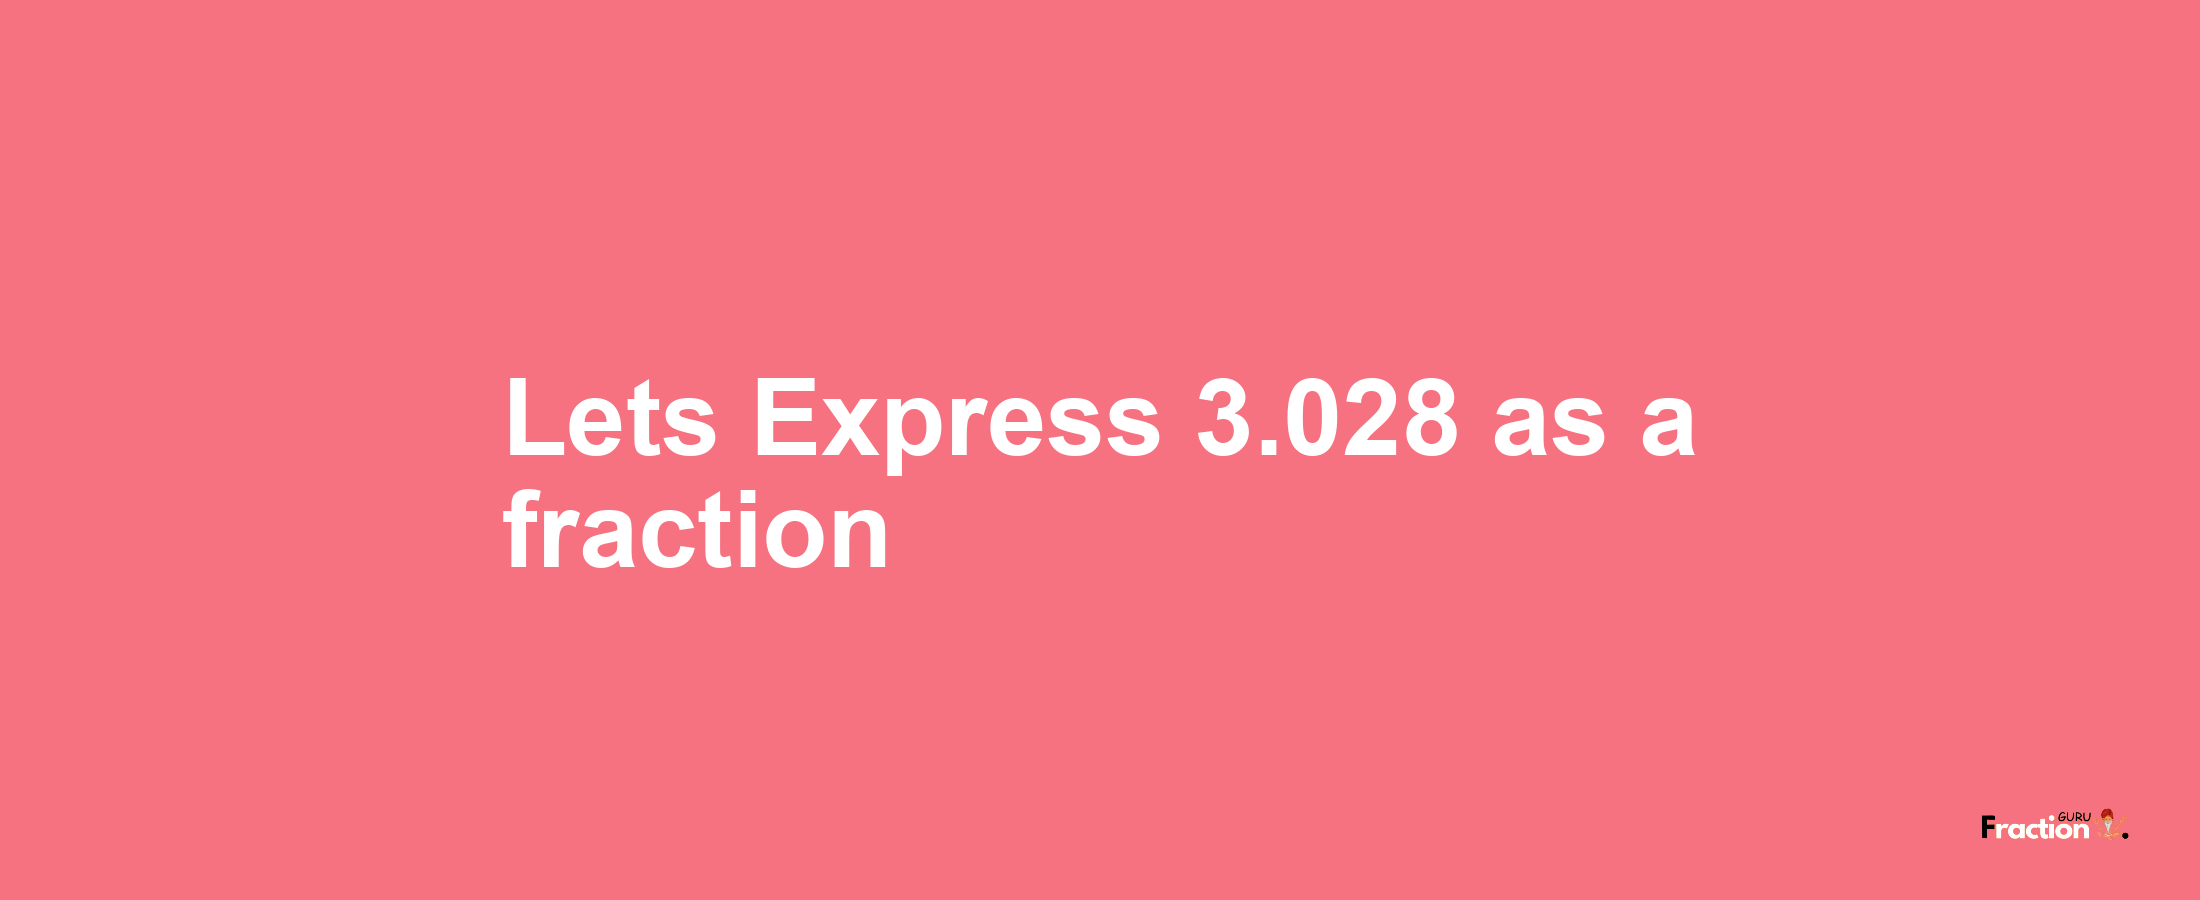 Lets Express 3.028 as afraction